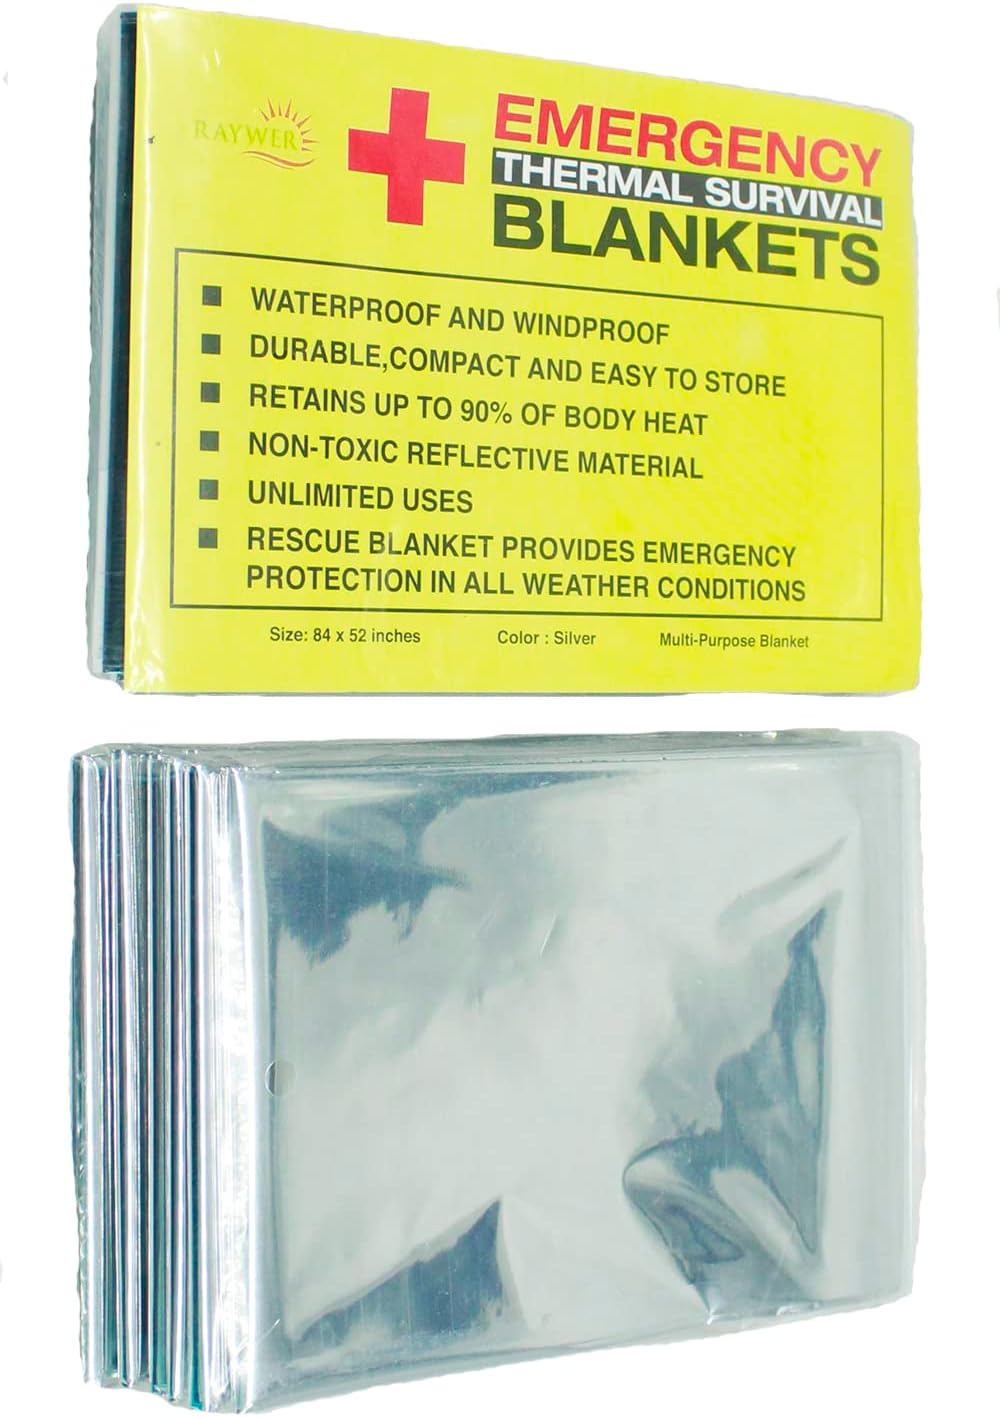 4 Pack Emergency Thermal Survival Blankets, Mylar Blankets for Outdoor, Camping, Hiking, Survival 84x52 $2.99 + Free Shipping w/ Prime or on $35+